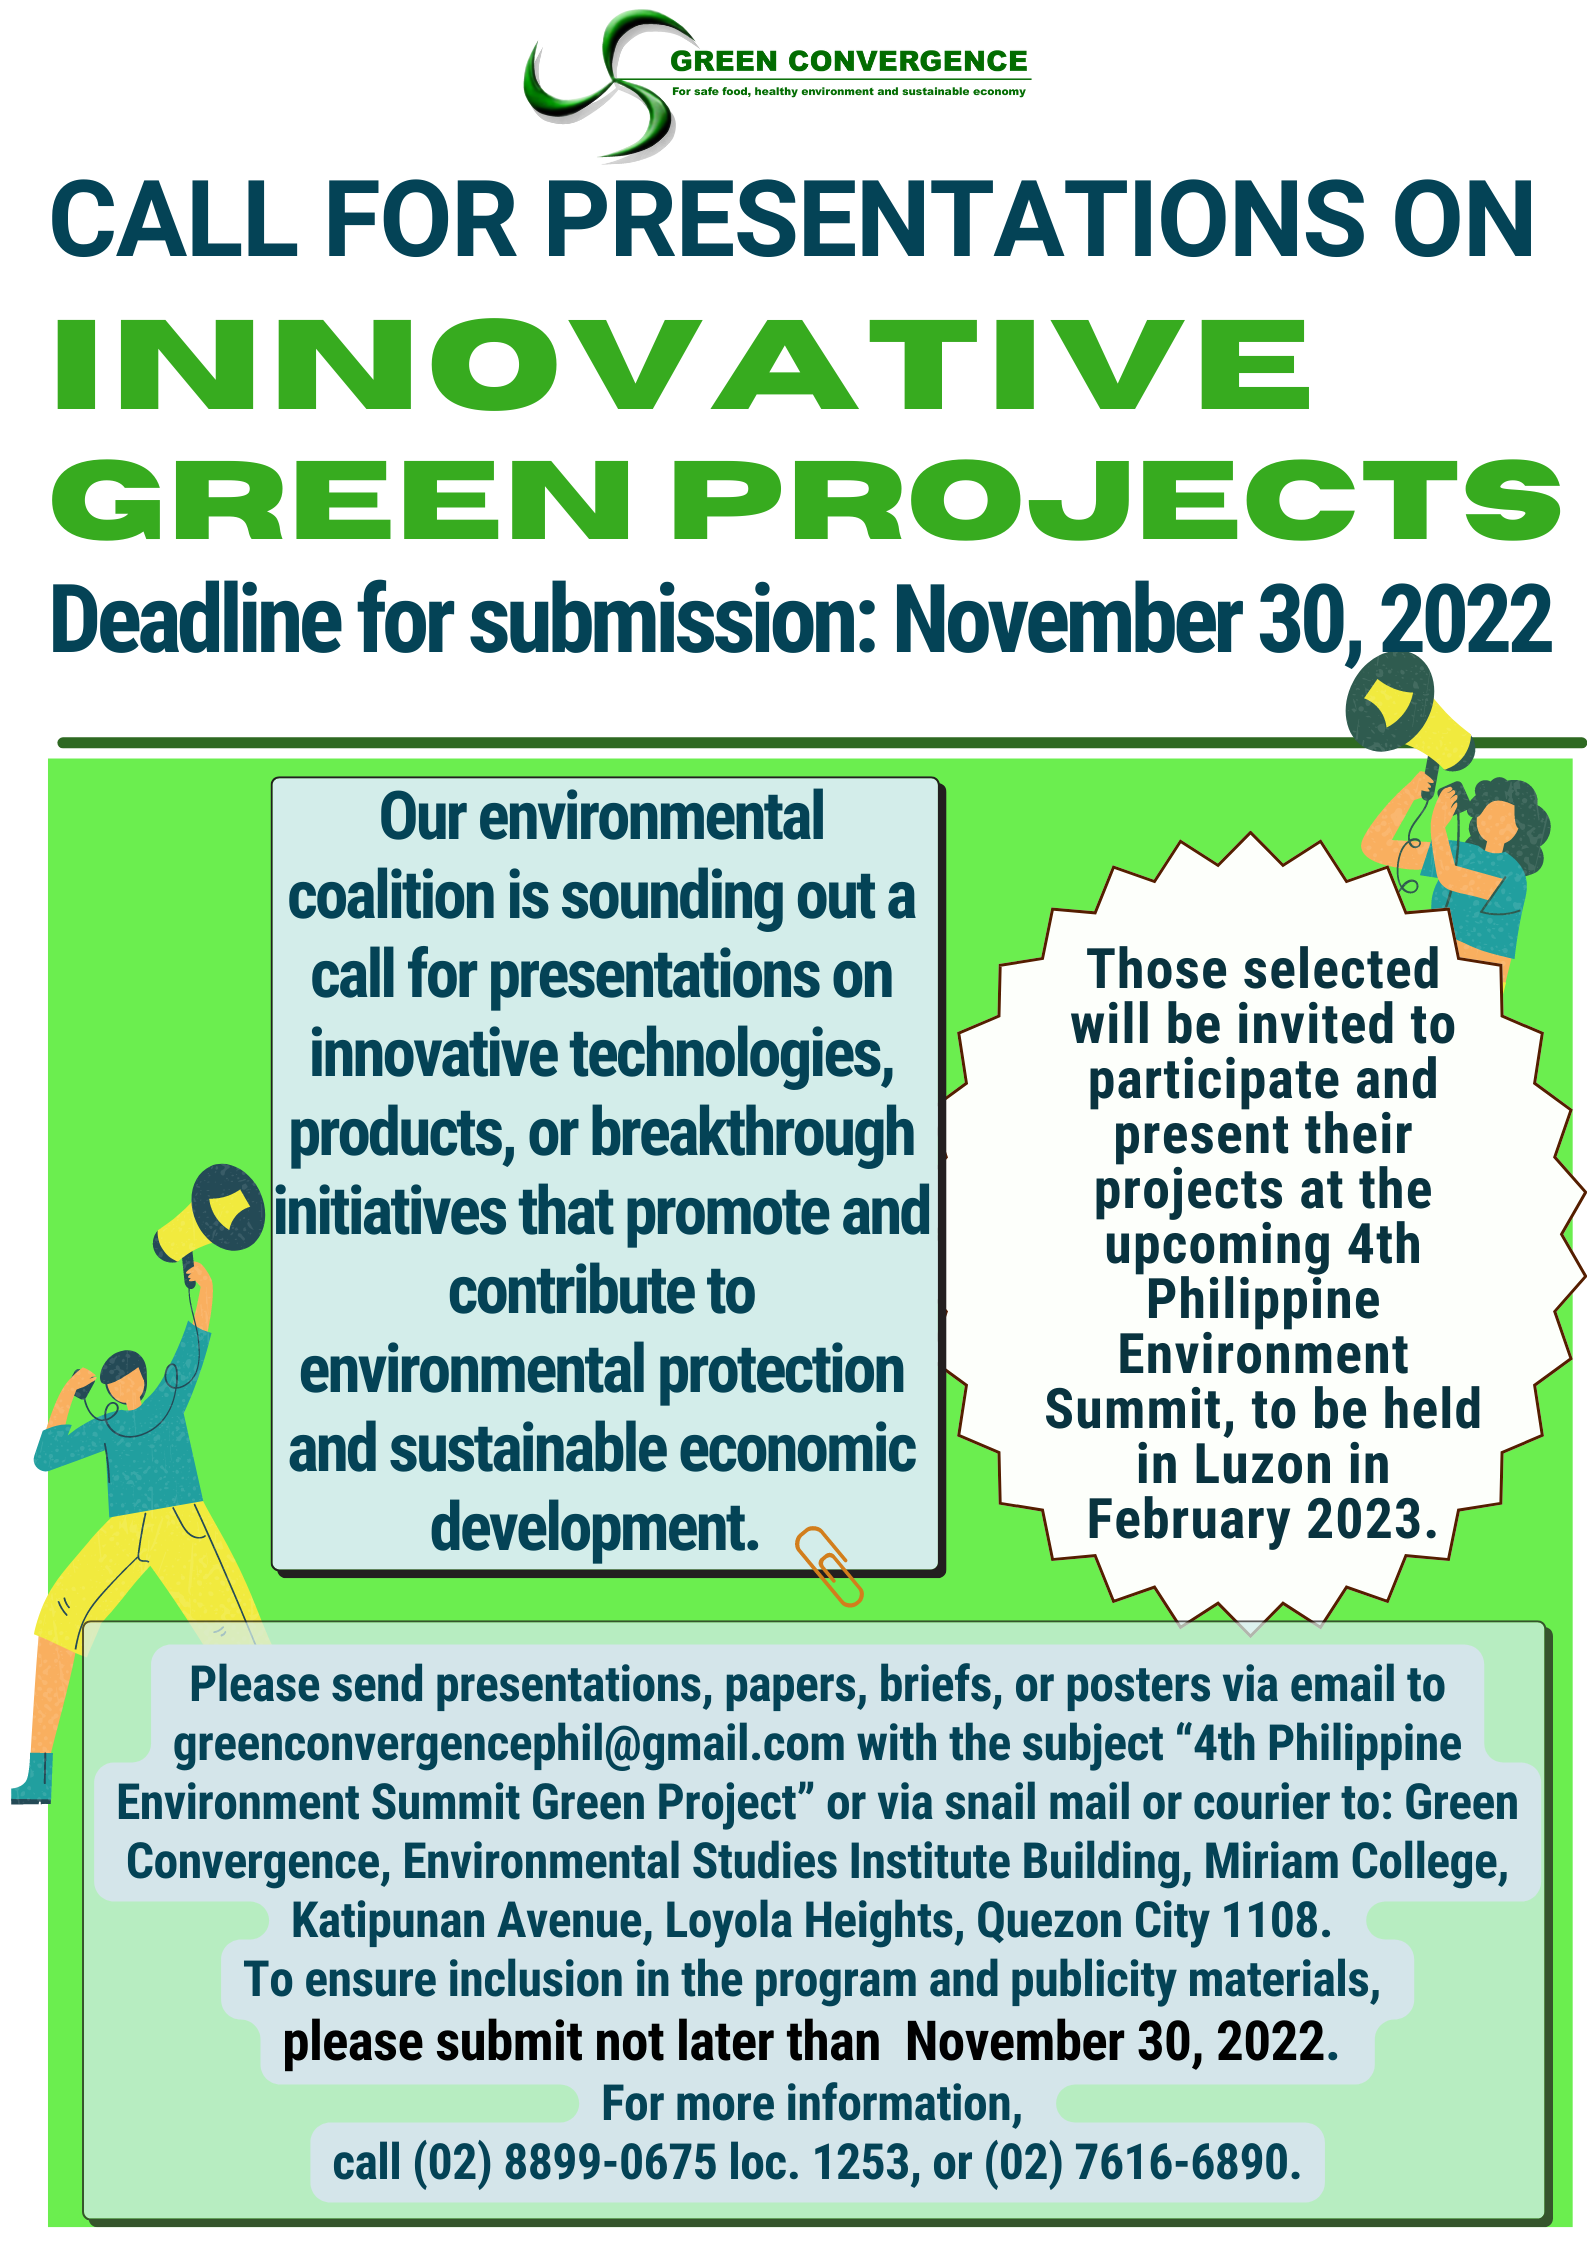 Call for Presentations on Innovative Green Projects